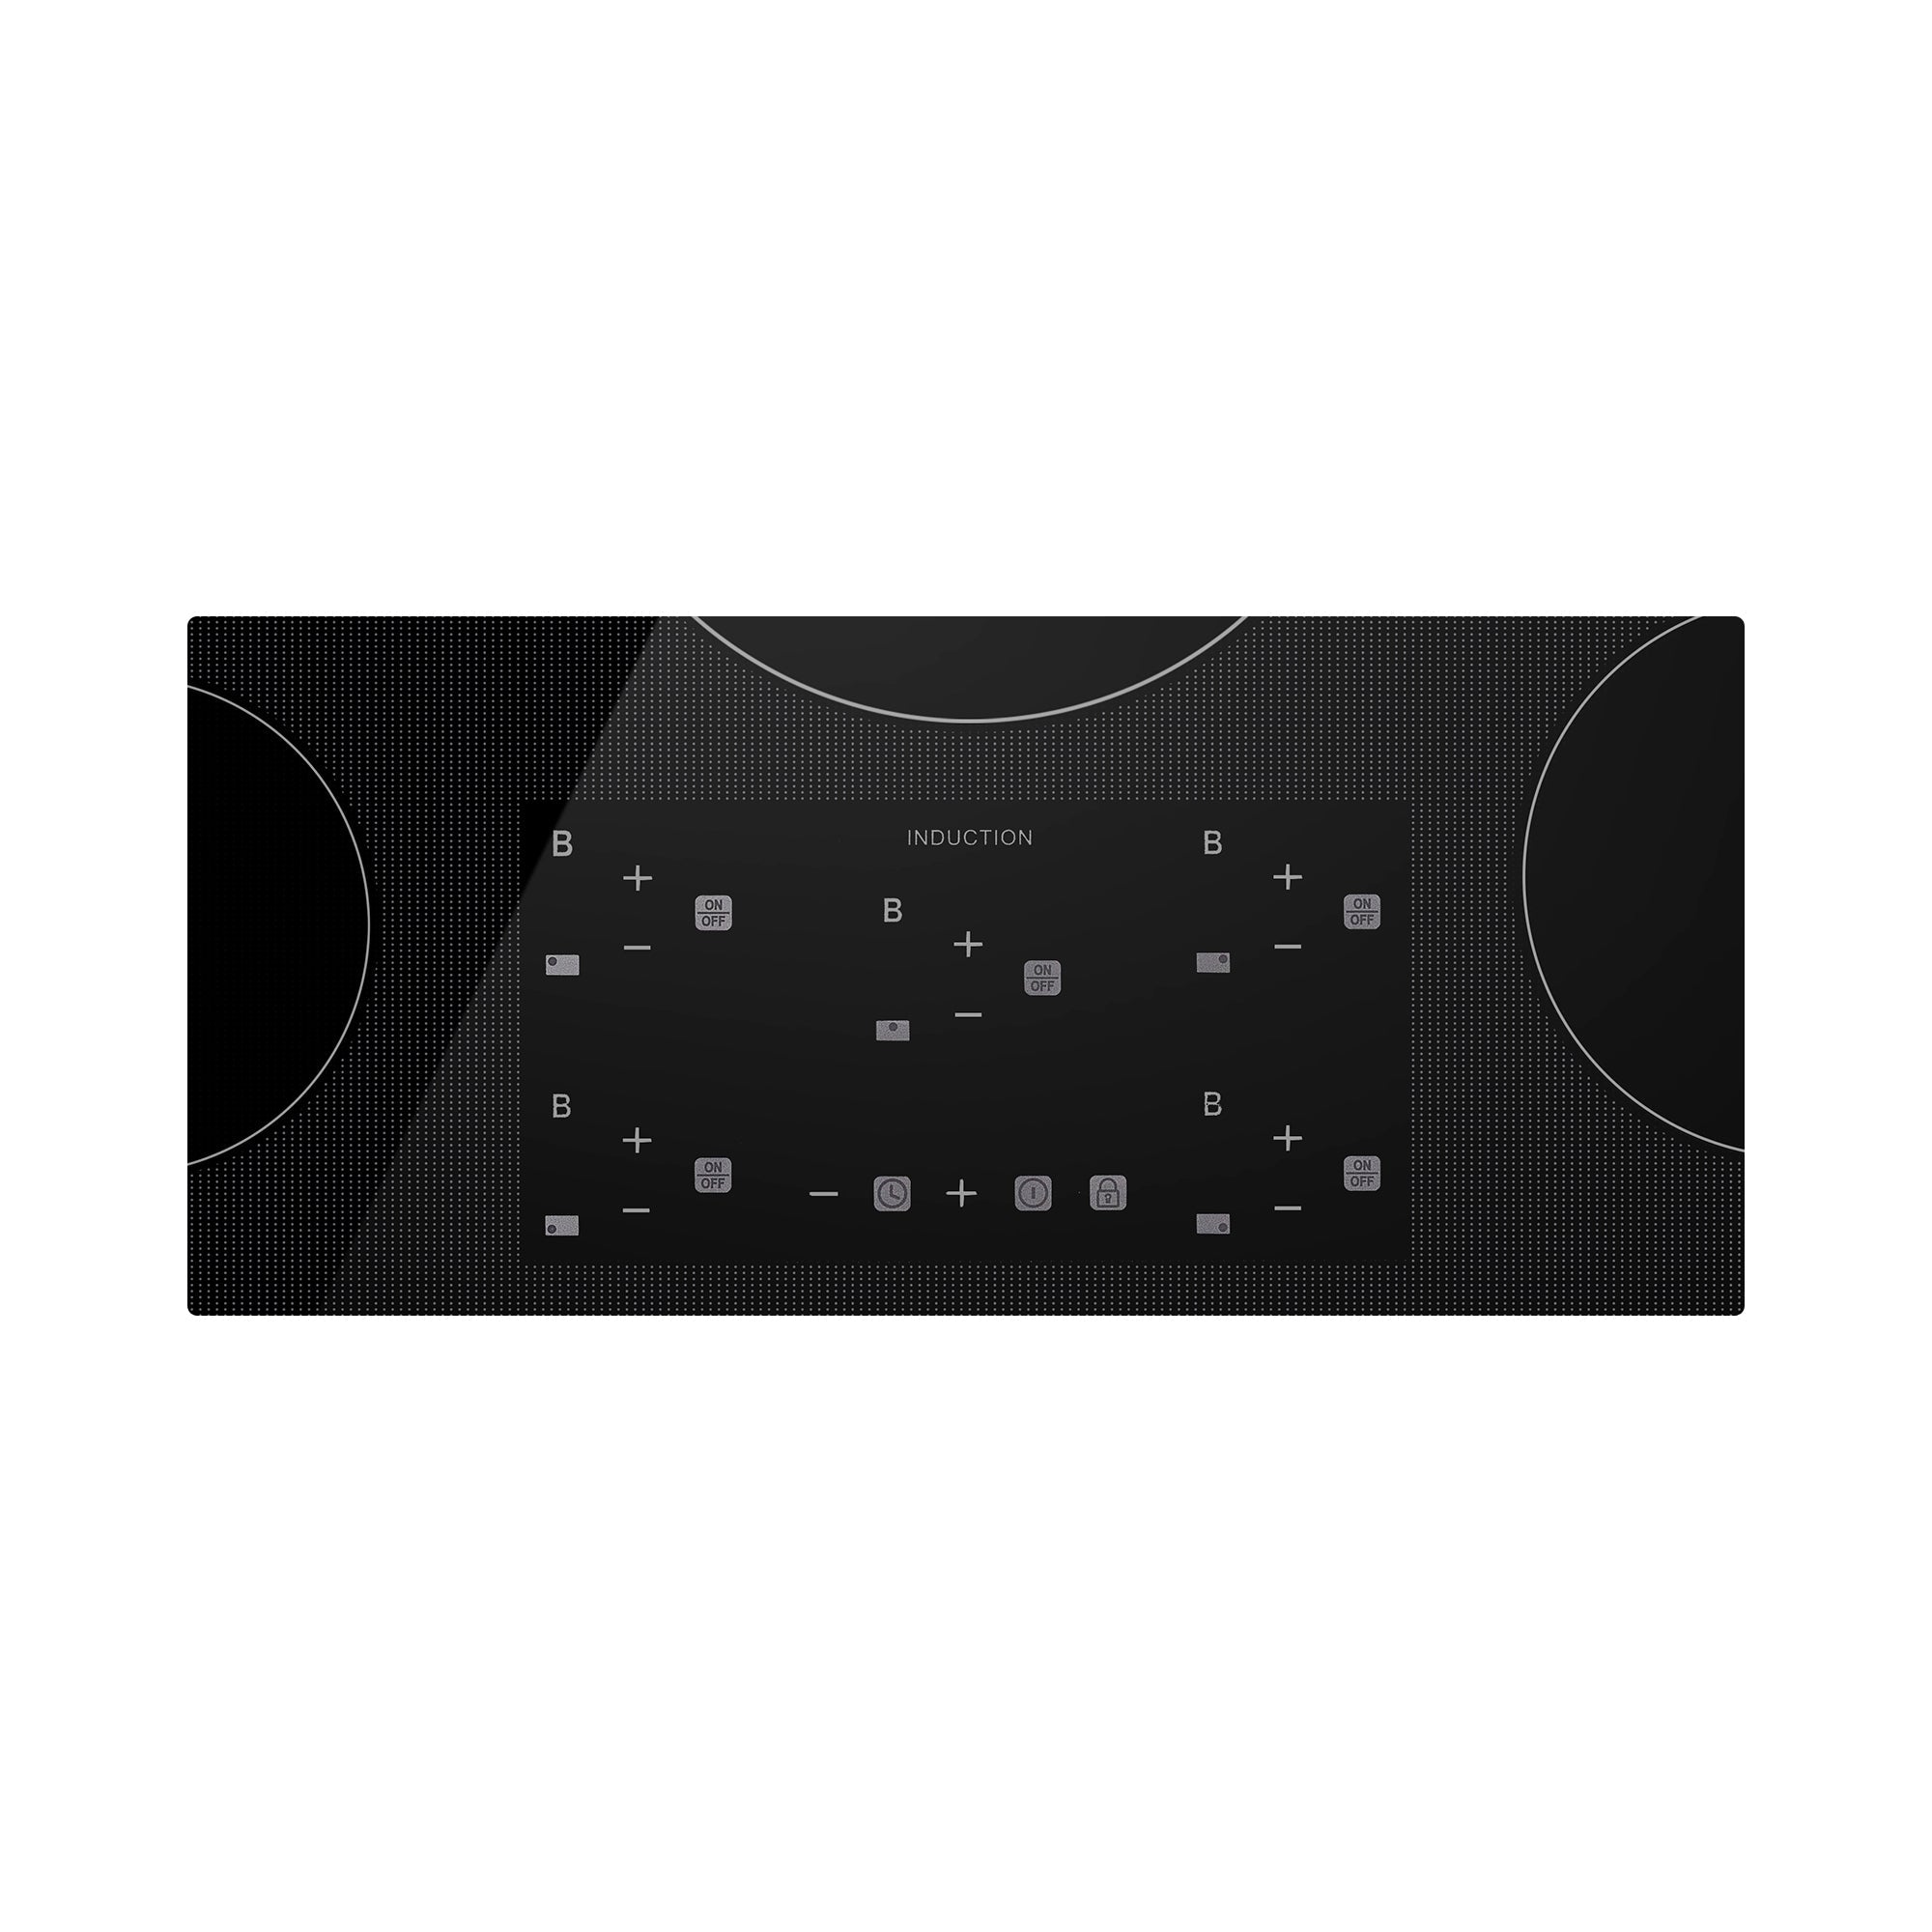 D Induction Cooktop - EMPV-IDC36-4